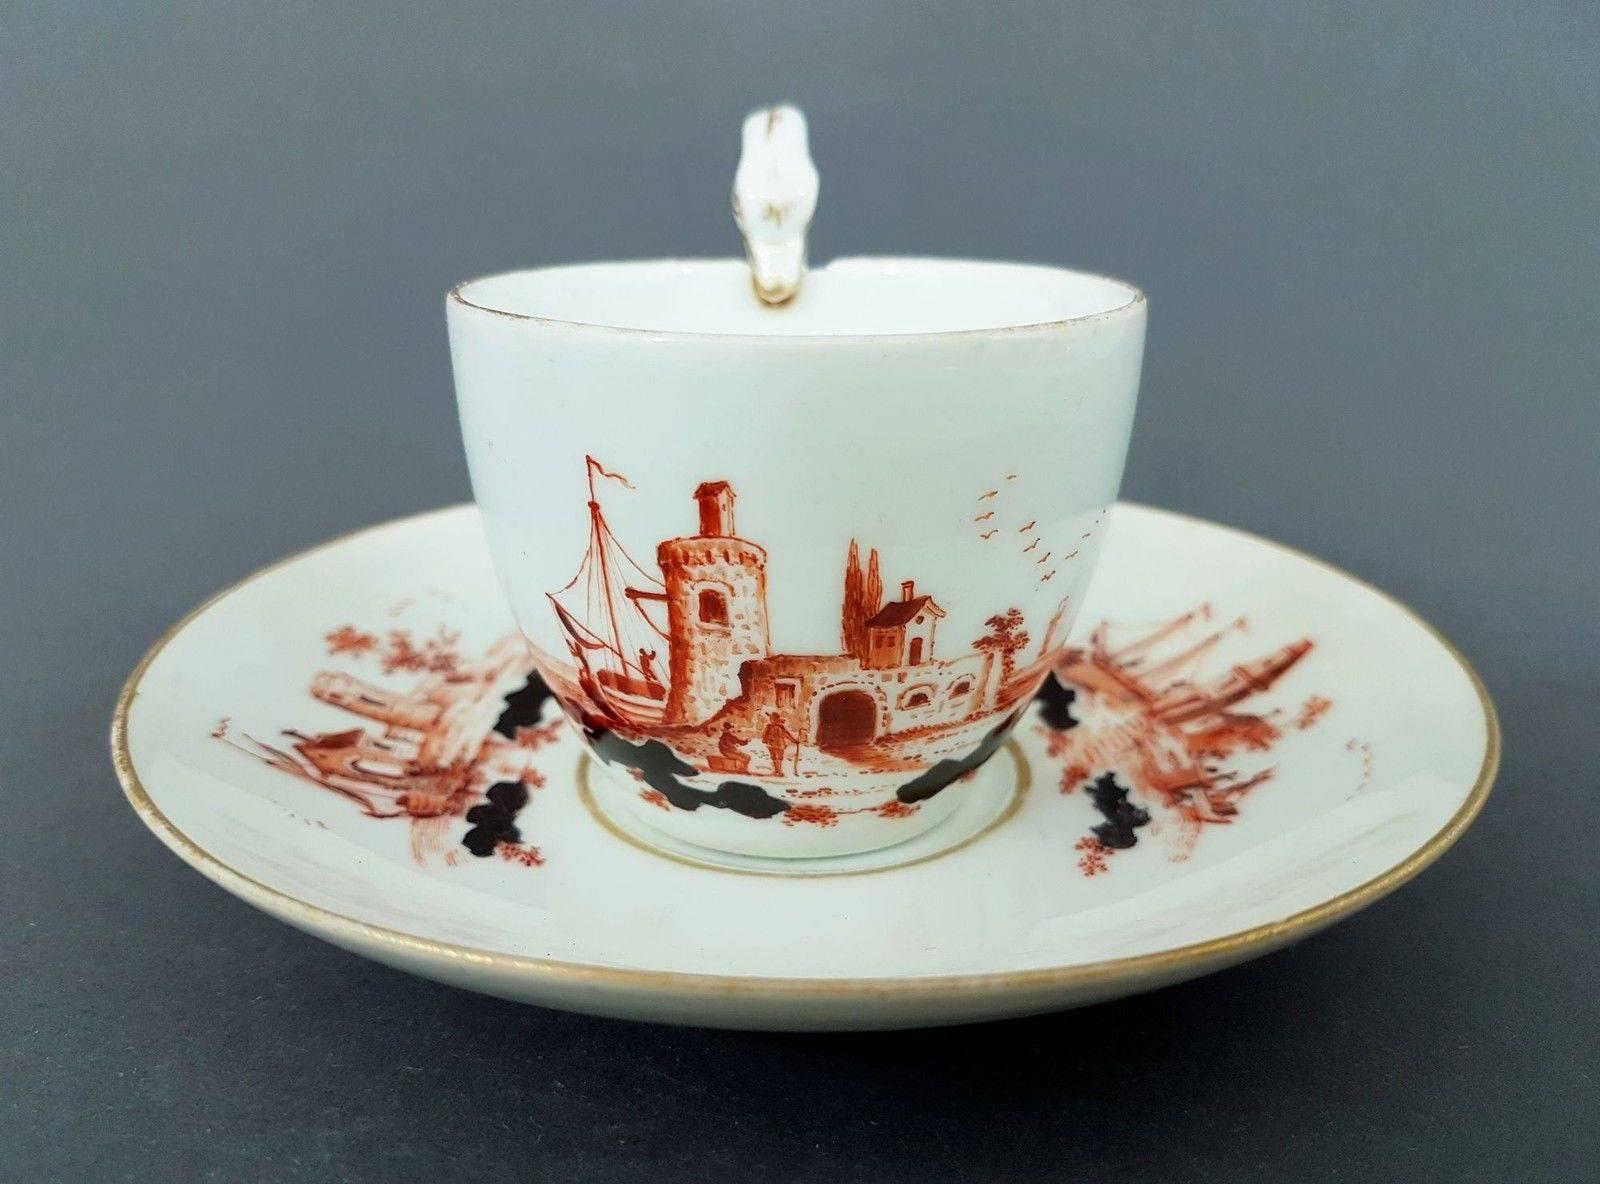 Meissen Porcelain Biedermeier Cup and Saucer with Swan Handle, circa 1820 In Good Condition For Sale In Washington Crossing, PA